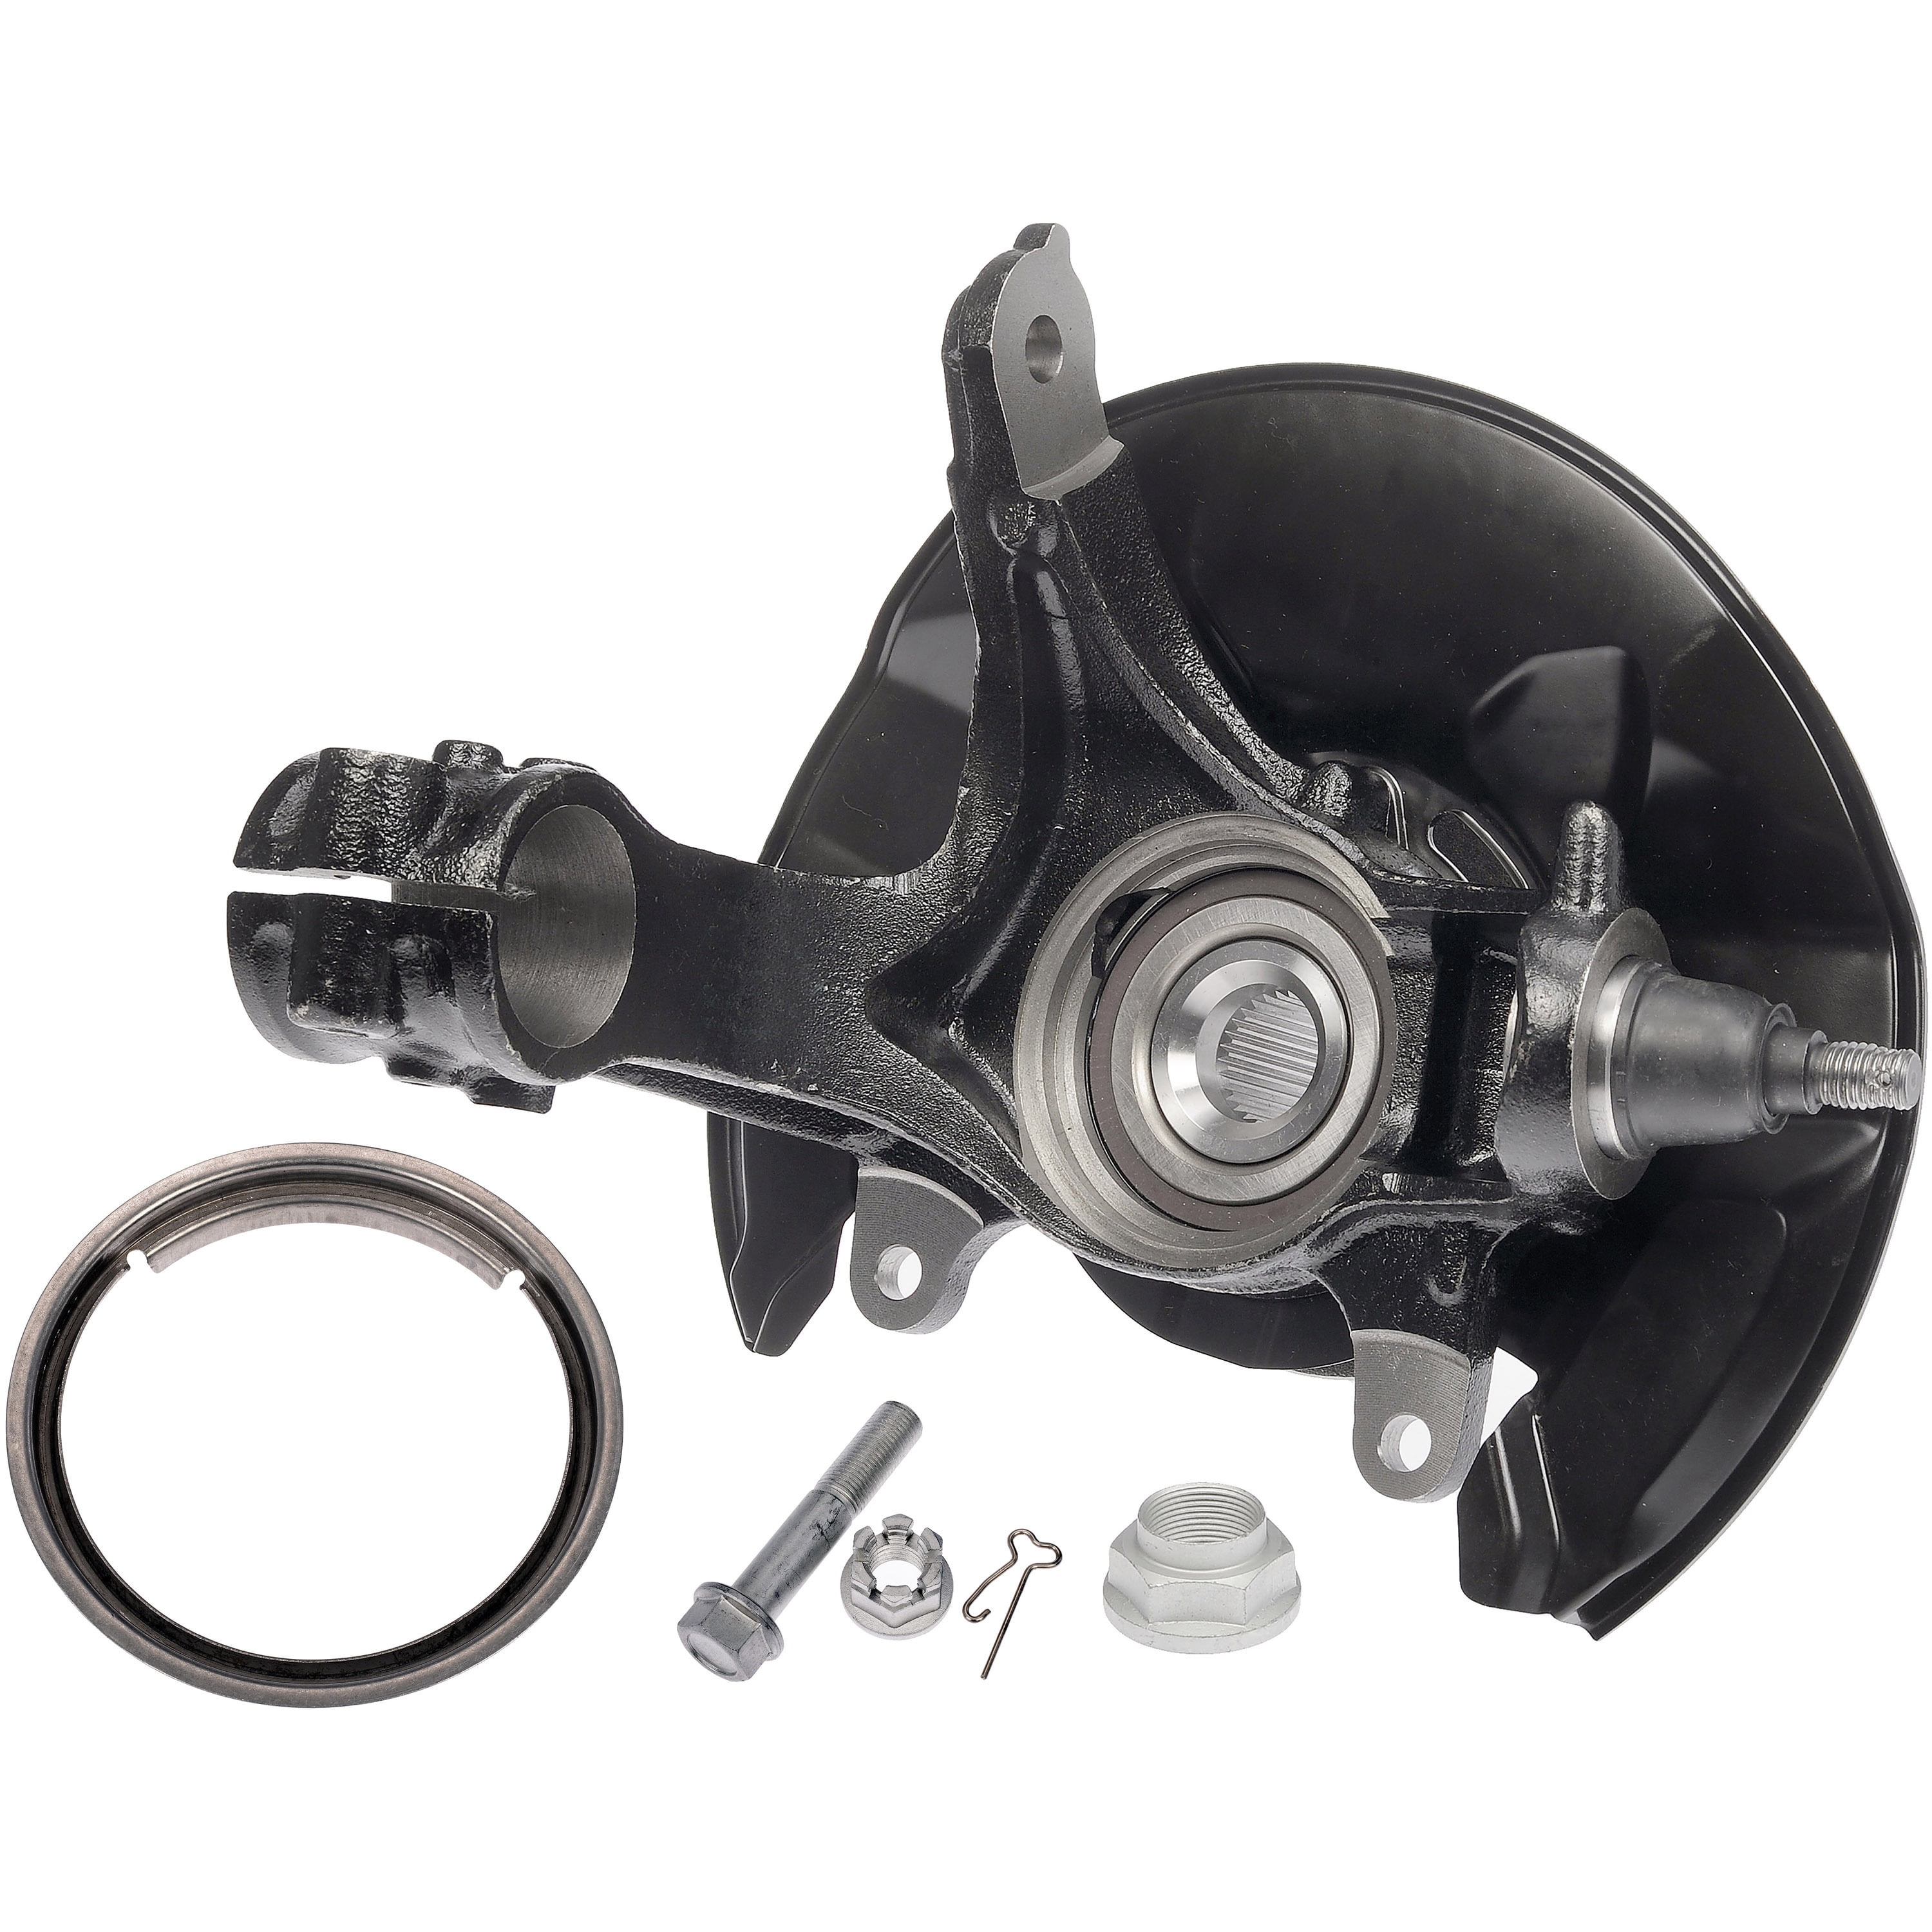 Steering - Knuckle Kit, 698-450, Front Right Loaded Knuckle